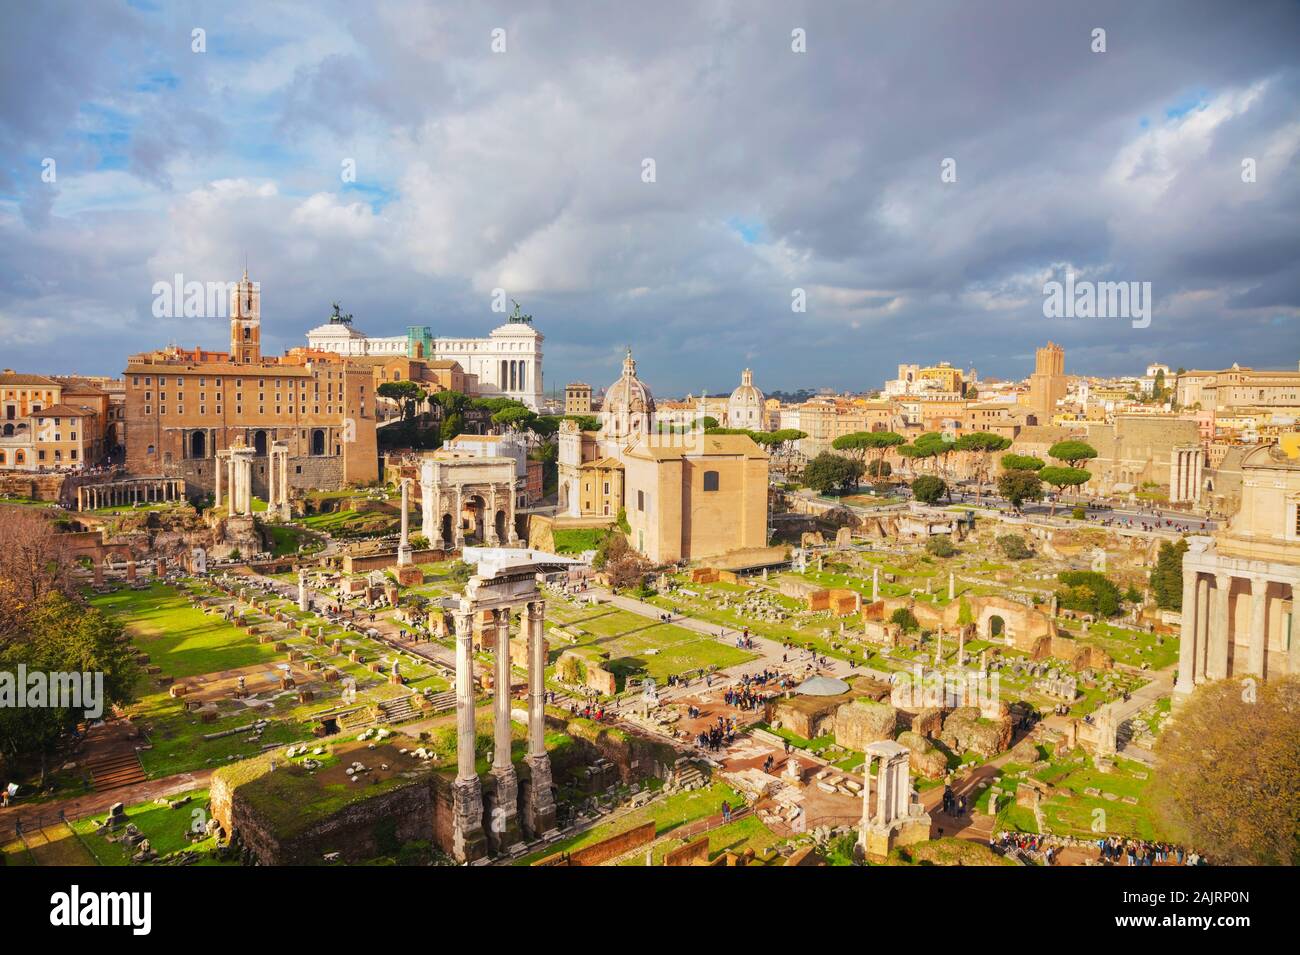 Roman forum ruins on a cloudy day in Rome, Italy Stock Photo